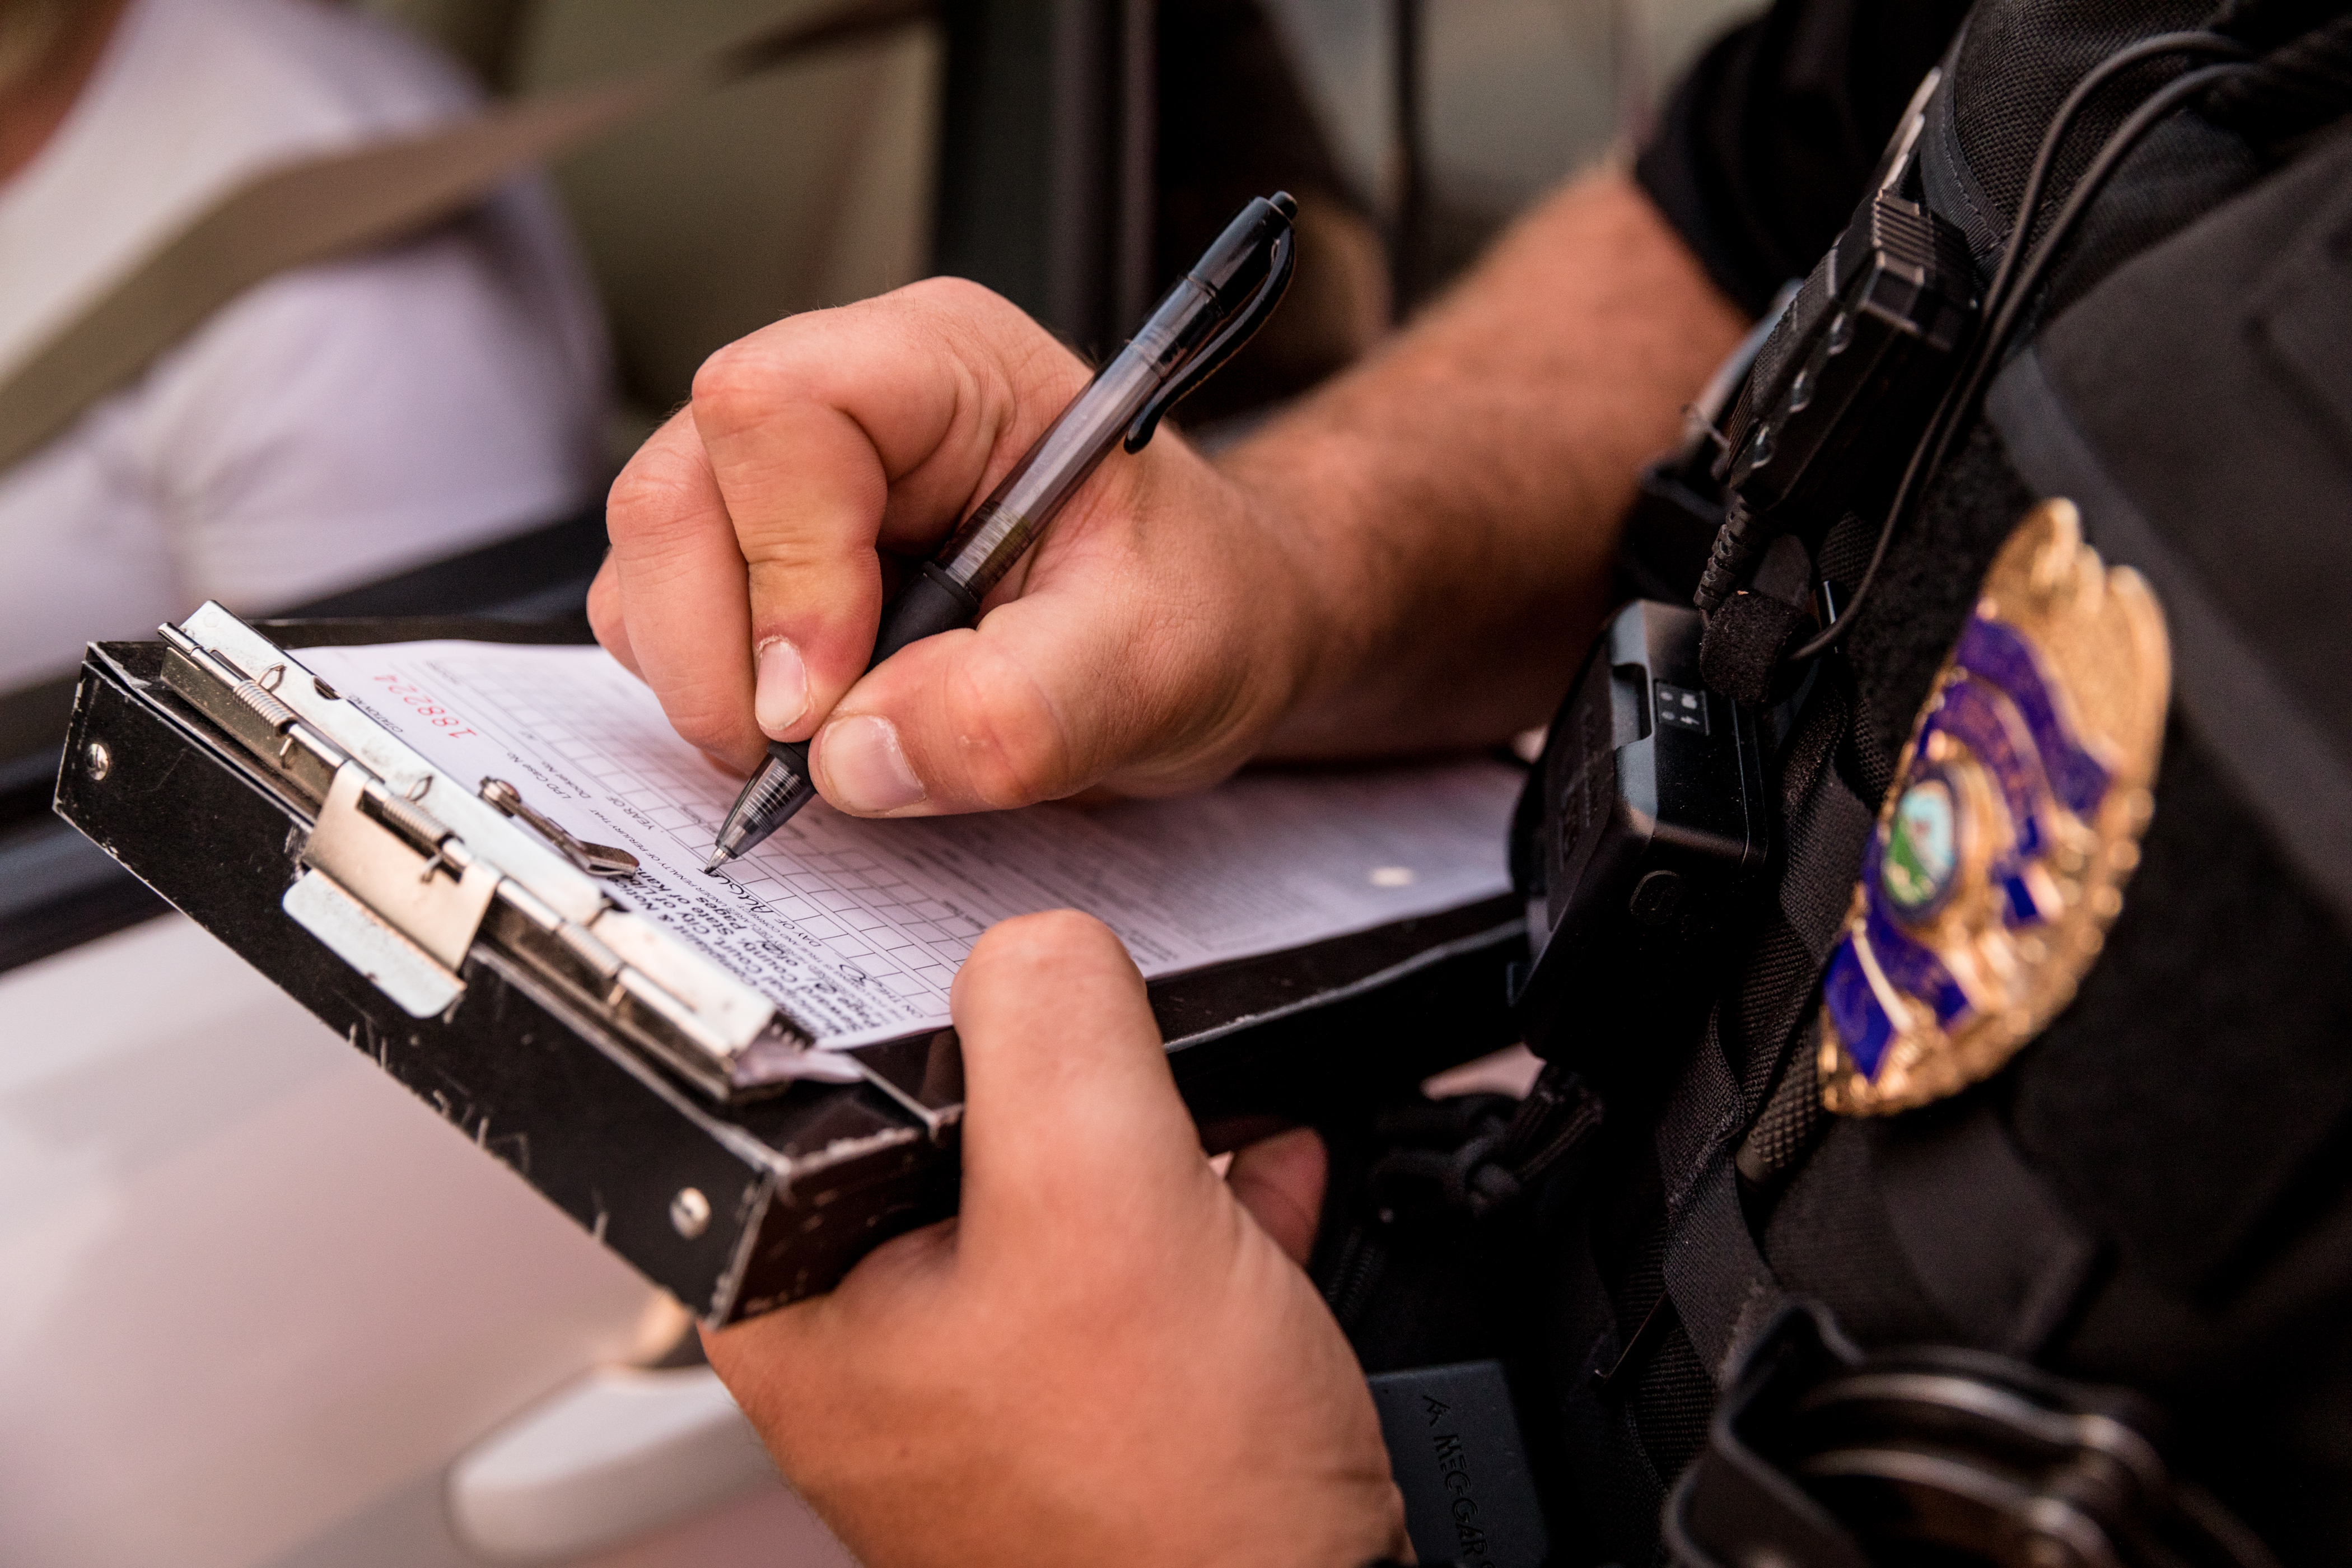 A police officer taking notes | Source: Shutterstock